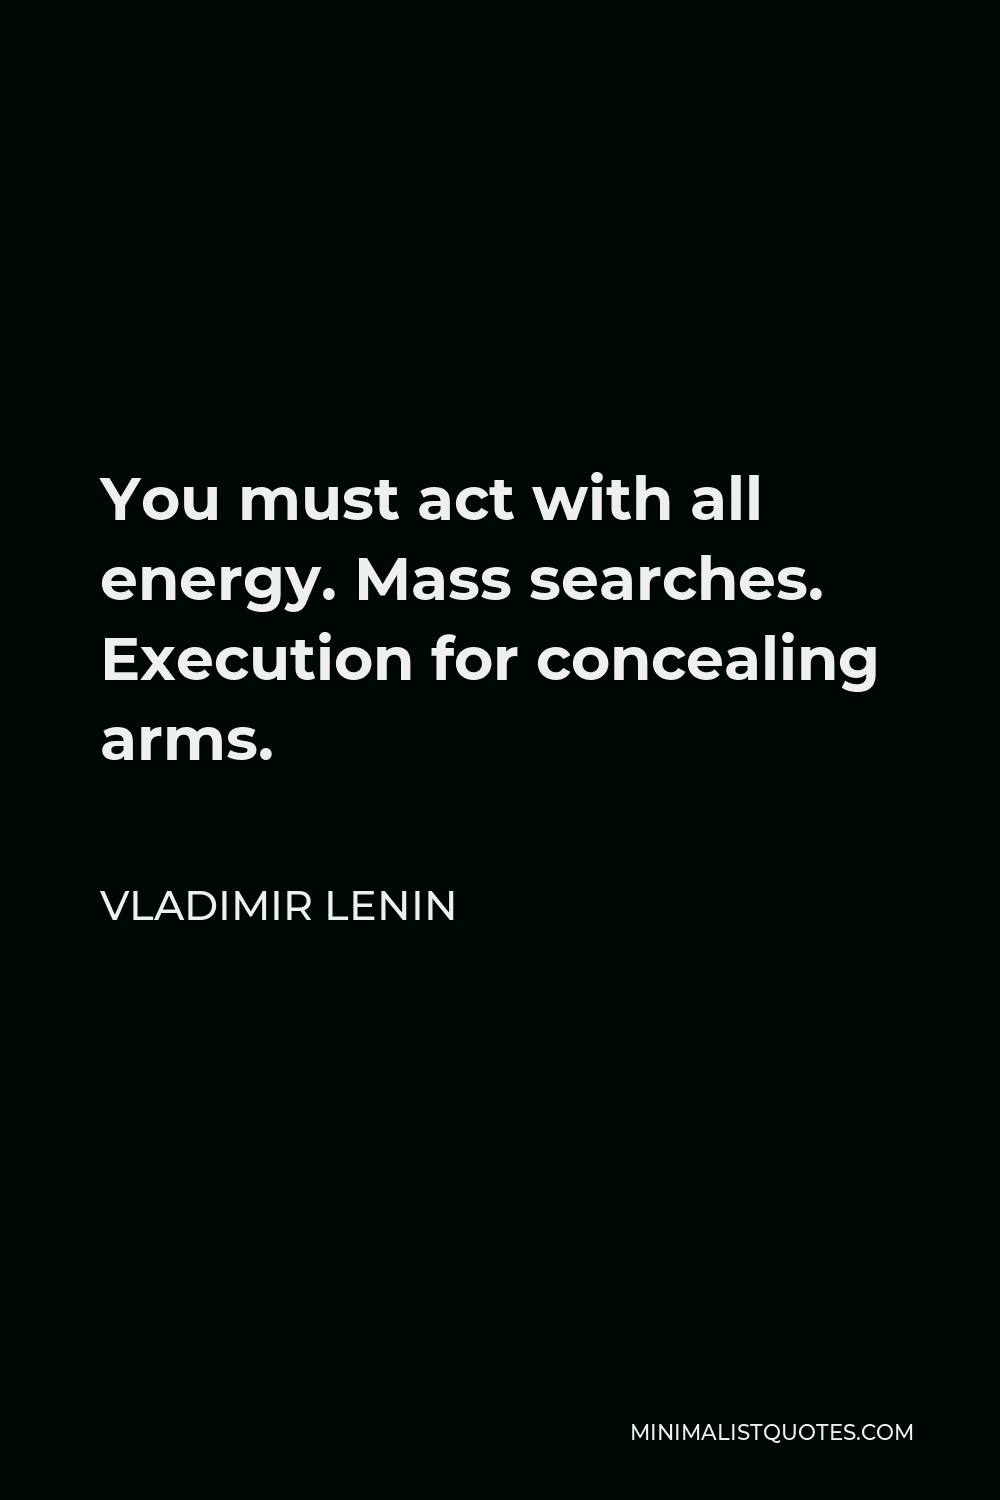 Vladimir Lenin Quote - You must act with all energy. Mass searches. Execution for concealing arms.